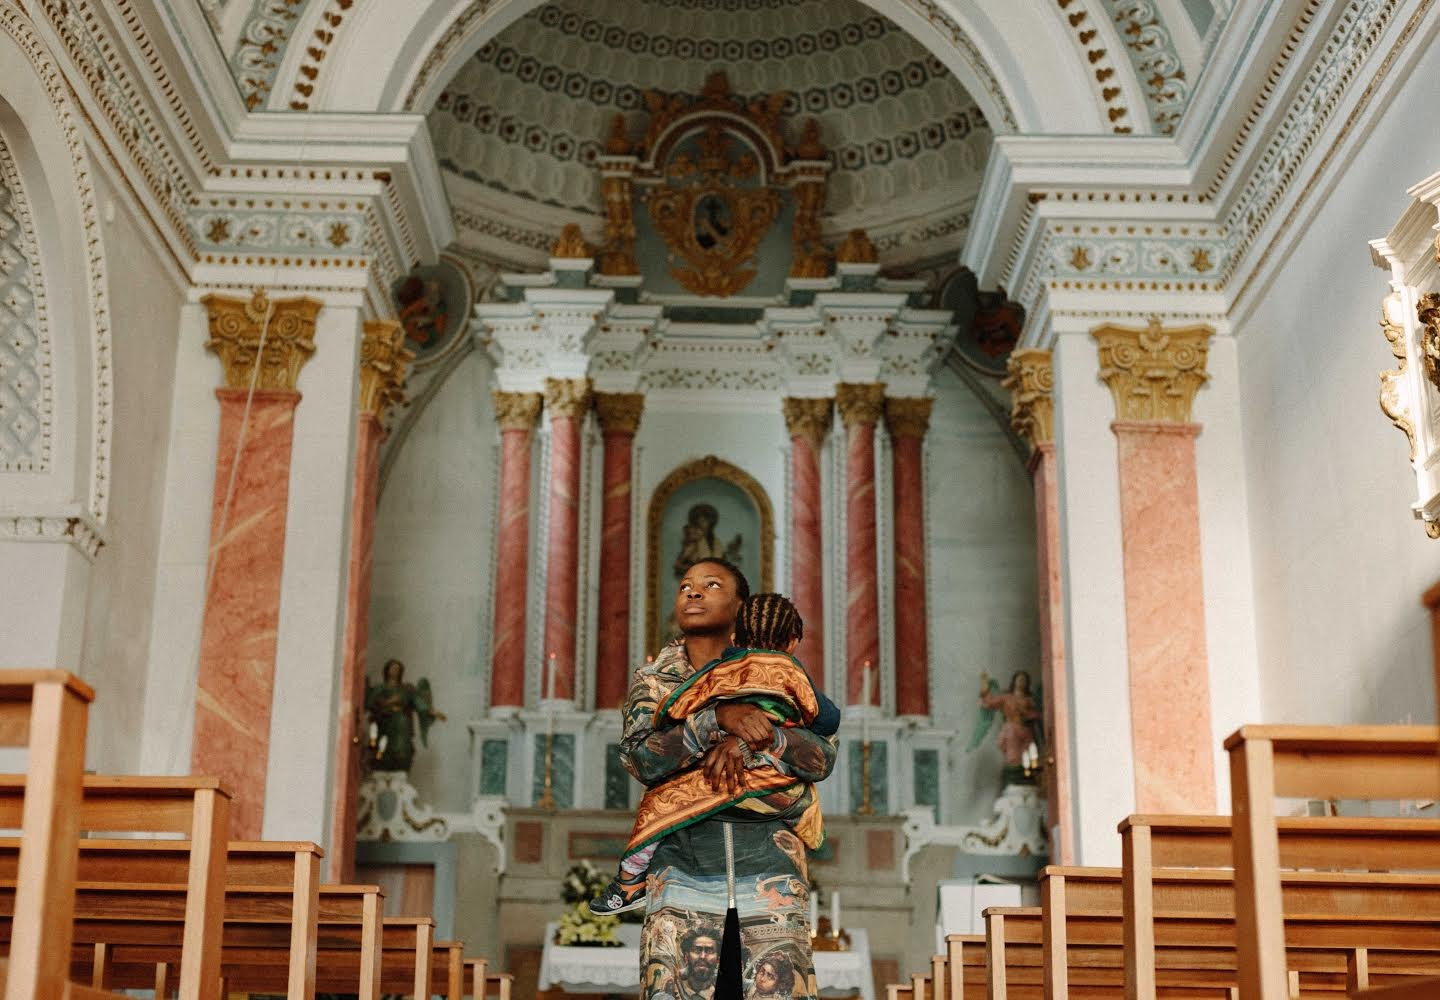     Neil-Anthony Watson, Favour Joseph, a Nigerian migrant who has made her way to Calabria, Italy, 2019

